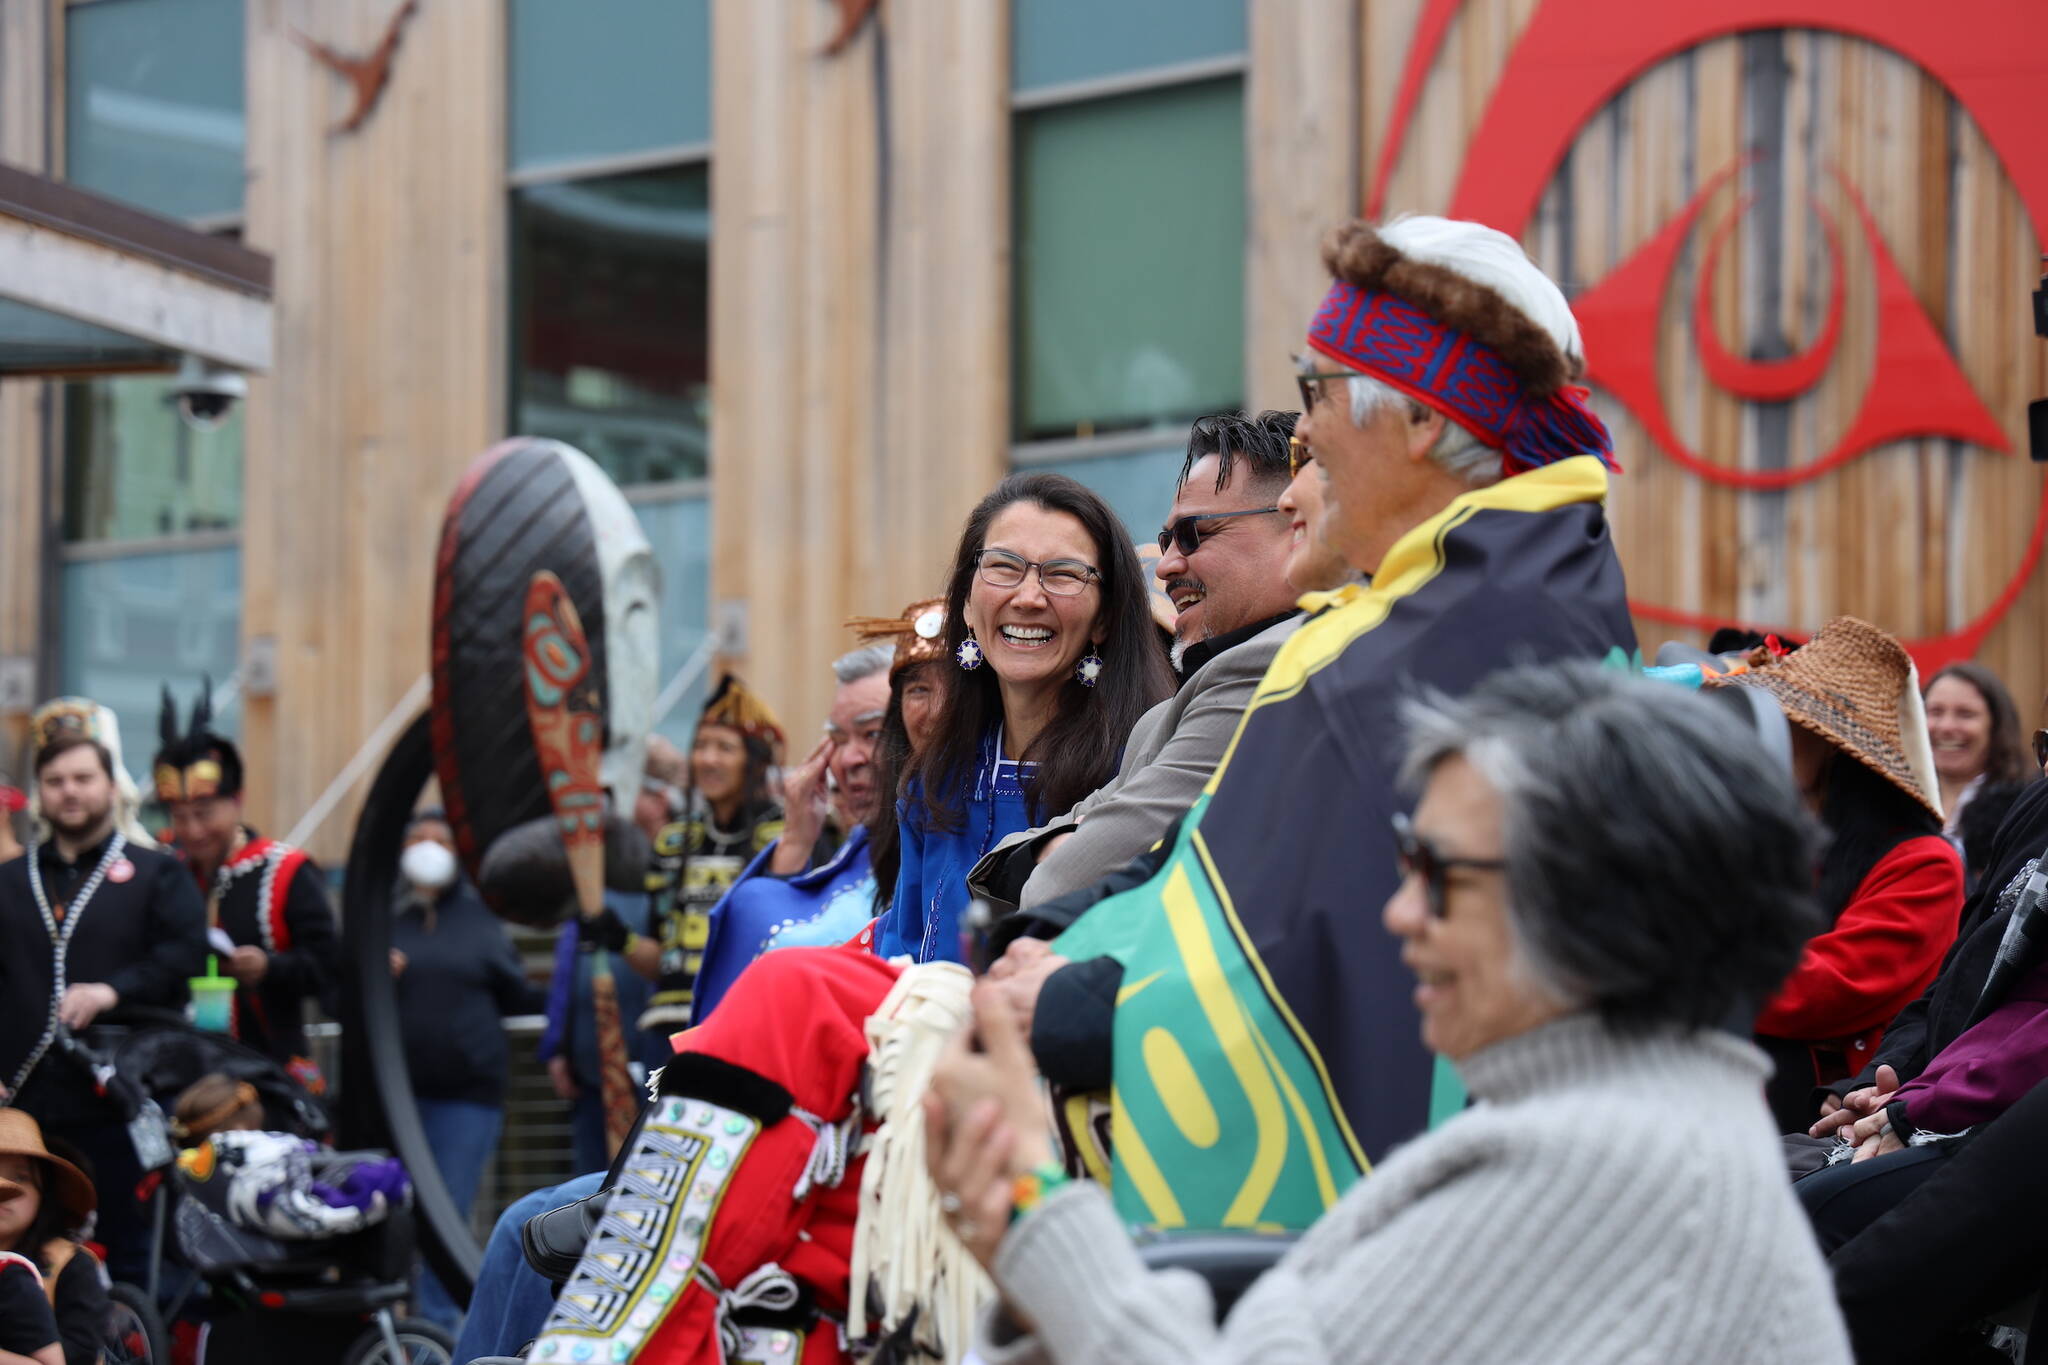 U.S. Rep. Mary Peltola, a Democrat and the first Alaska Native person to represent Alaska in Congress, laughs while sitting in the crowd at the dedication ceremony of the Kootéeyaa Deiyí, Totem Pole Trail, held Saturday in downtown Juneau at Heritage Plaza. (Clarise Larson / Juneau Empire)